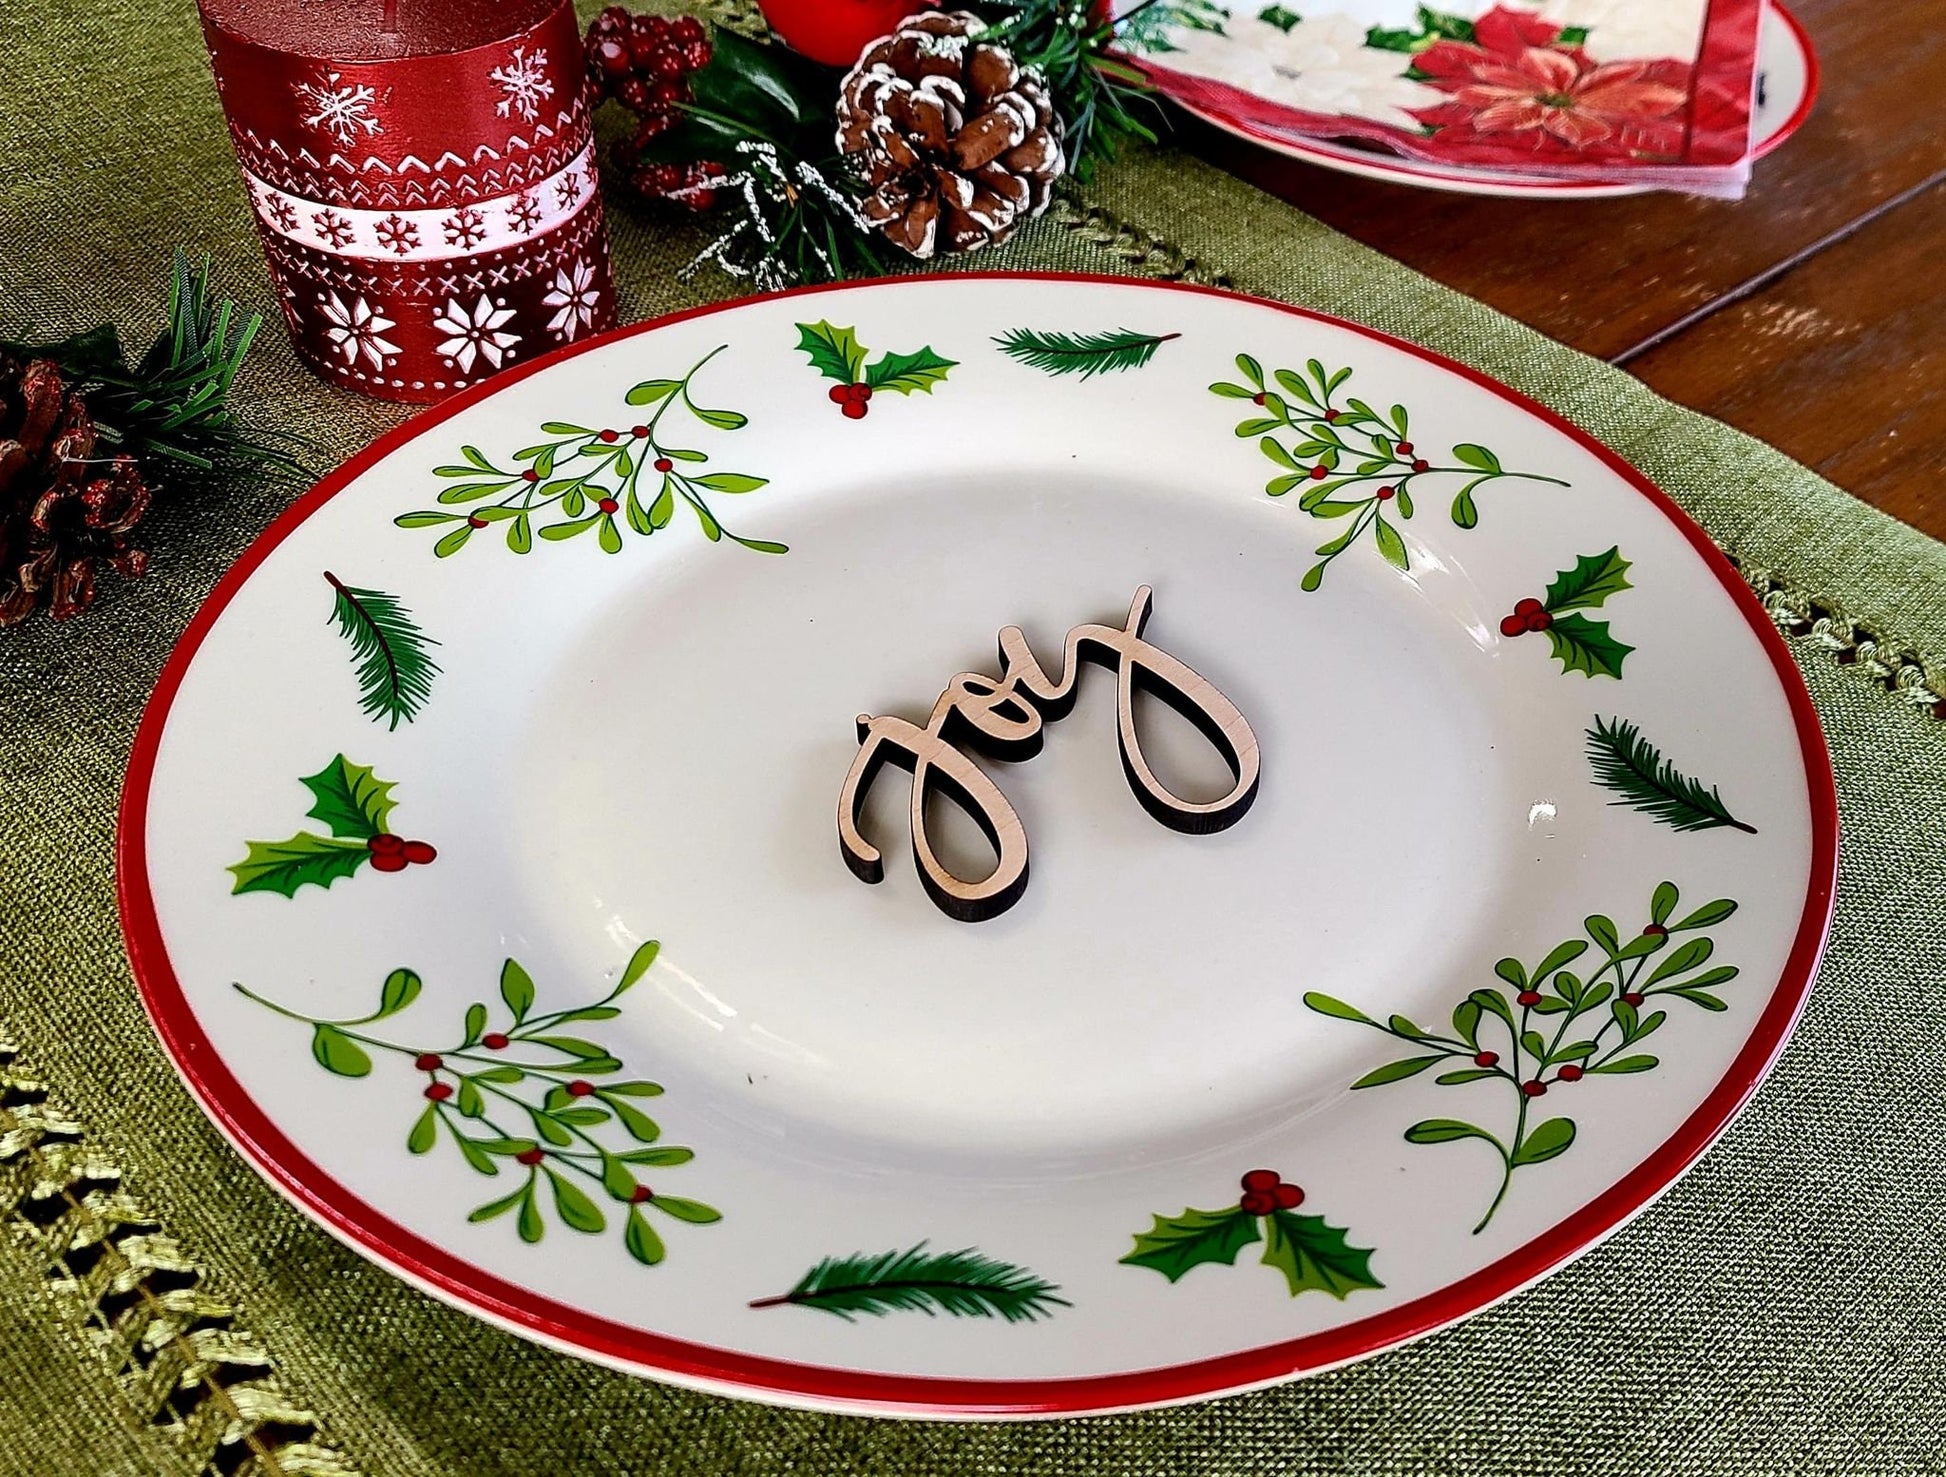 Joy Place Cards, Christmas Plate setting cards, Christmas Wooden Word, Holiday Decor, Christmas Place settings, Small Wood Joy Sign